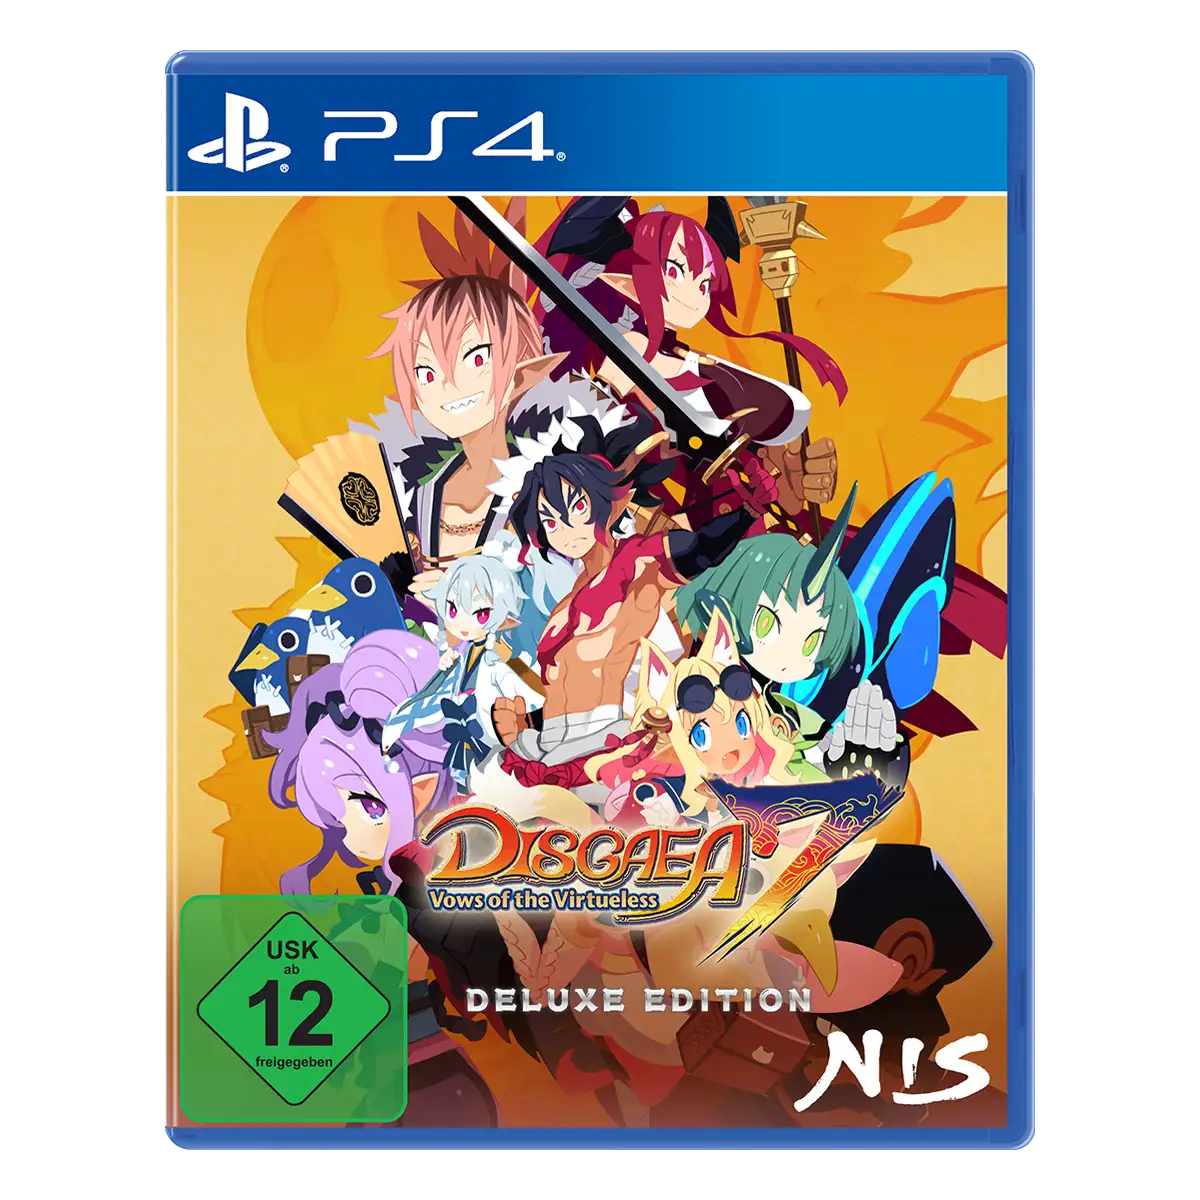 Disgaea 7: Vows of the Virtueless Deluxe Edition (PS4) Thumbnail 1